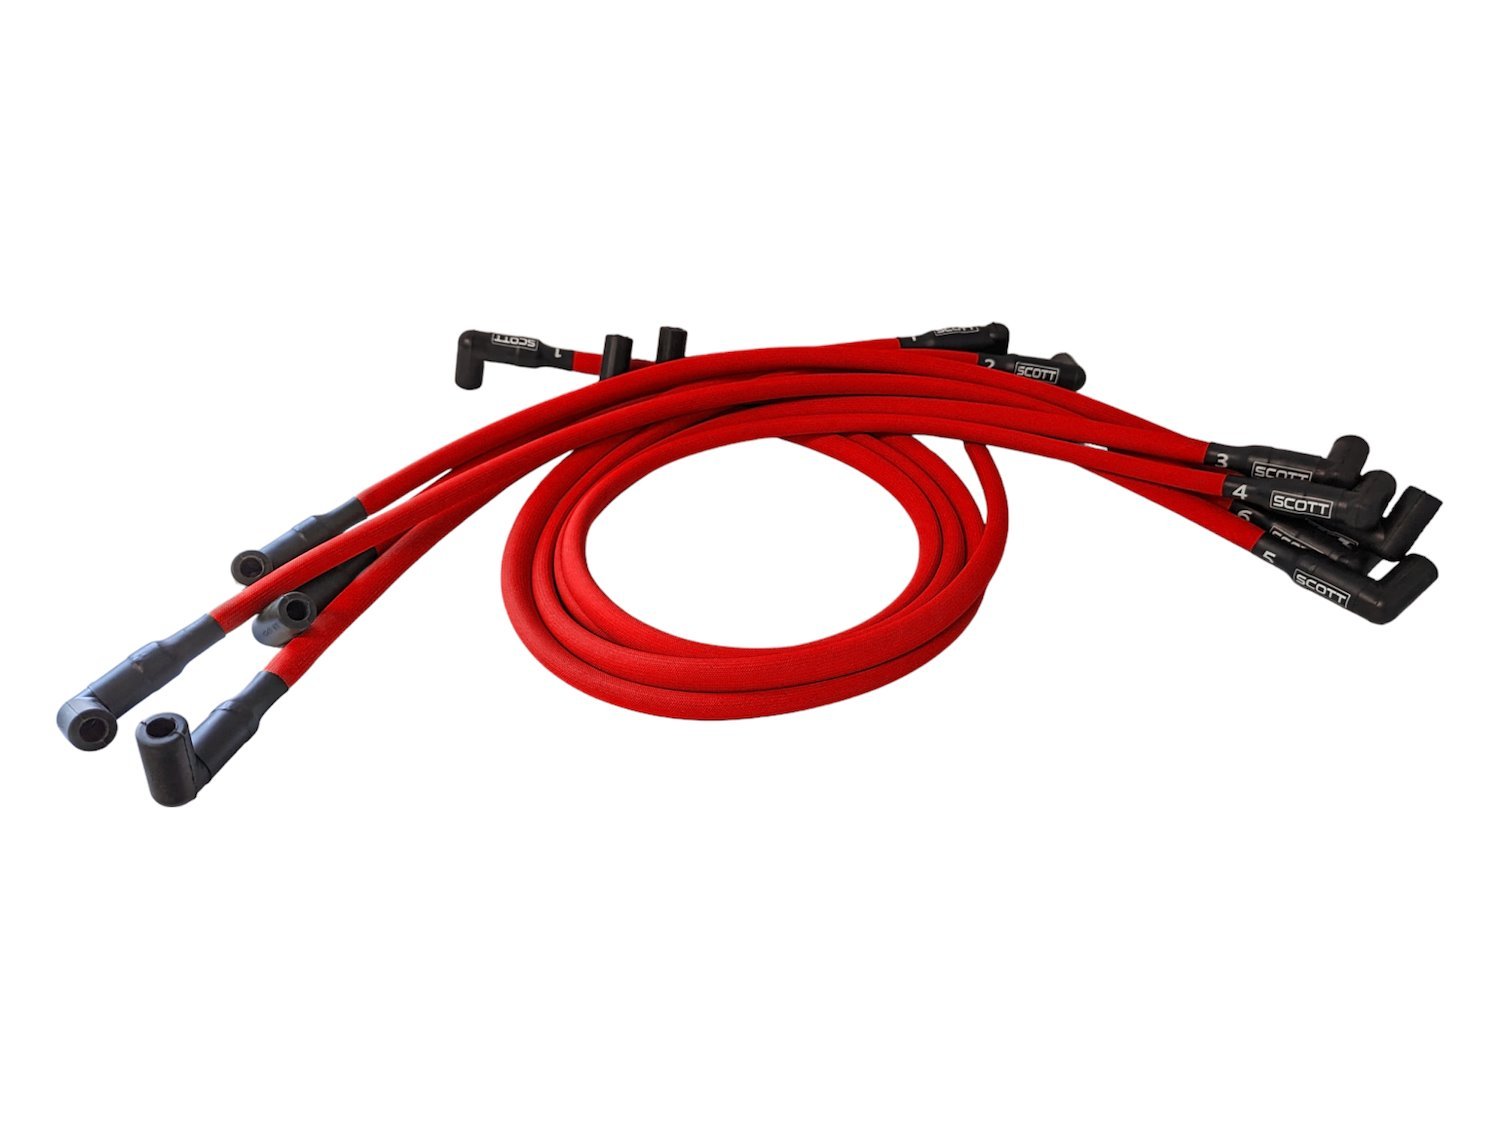 SPW300-PS-402-2 Super Mag Fiberglass-Oversleeved Spark Plug Wire Set for Small Block Chevy, Over Valve Cover [Red]